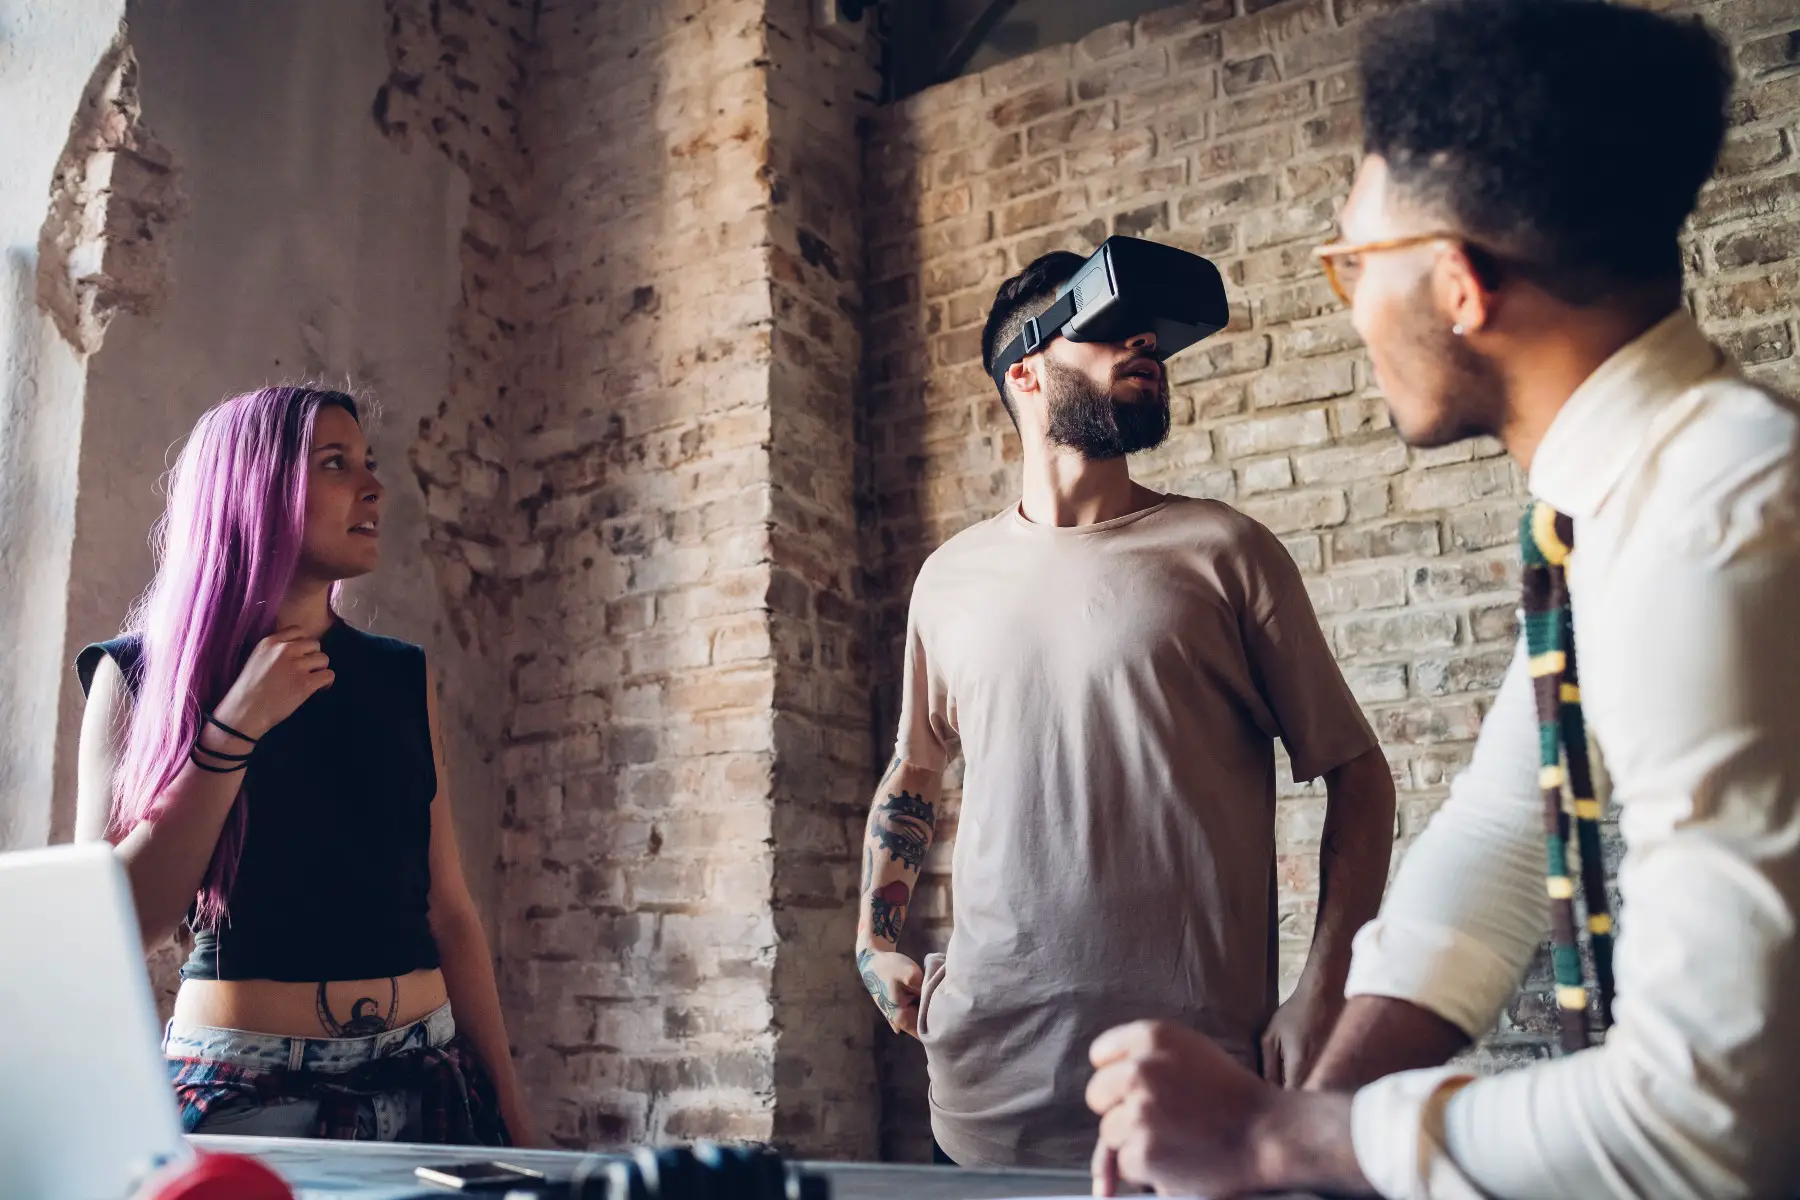 Three people in a loft, one is wearing VR goggles, while the other two are looking at him.